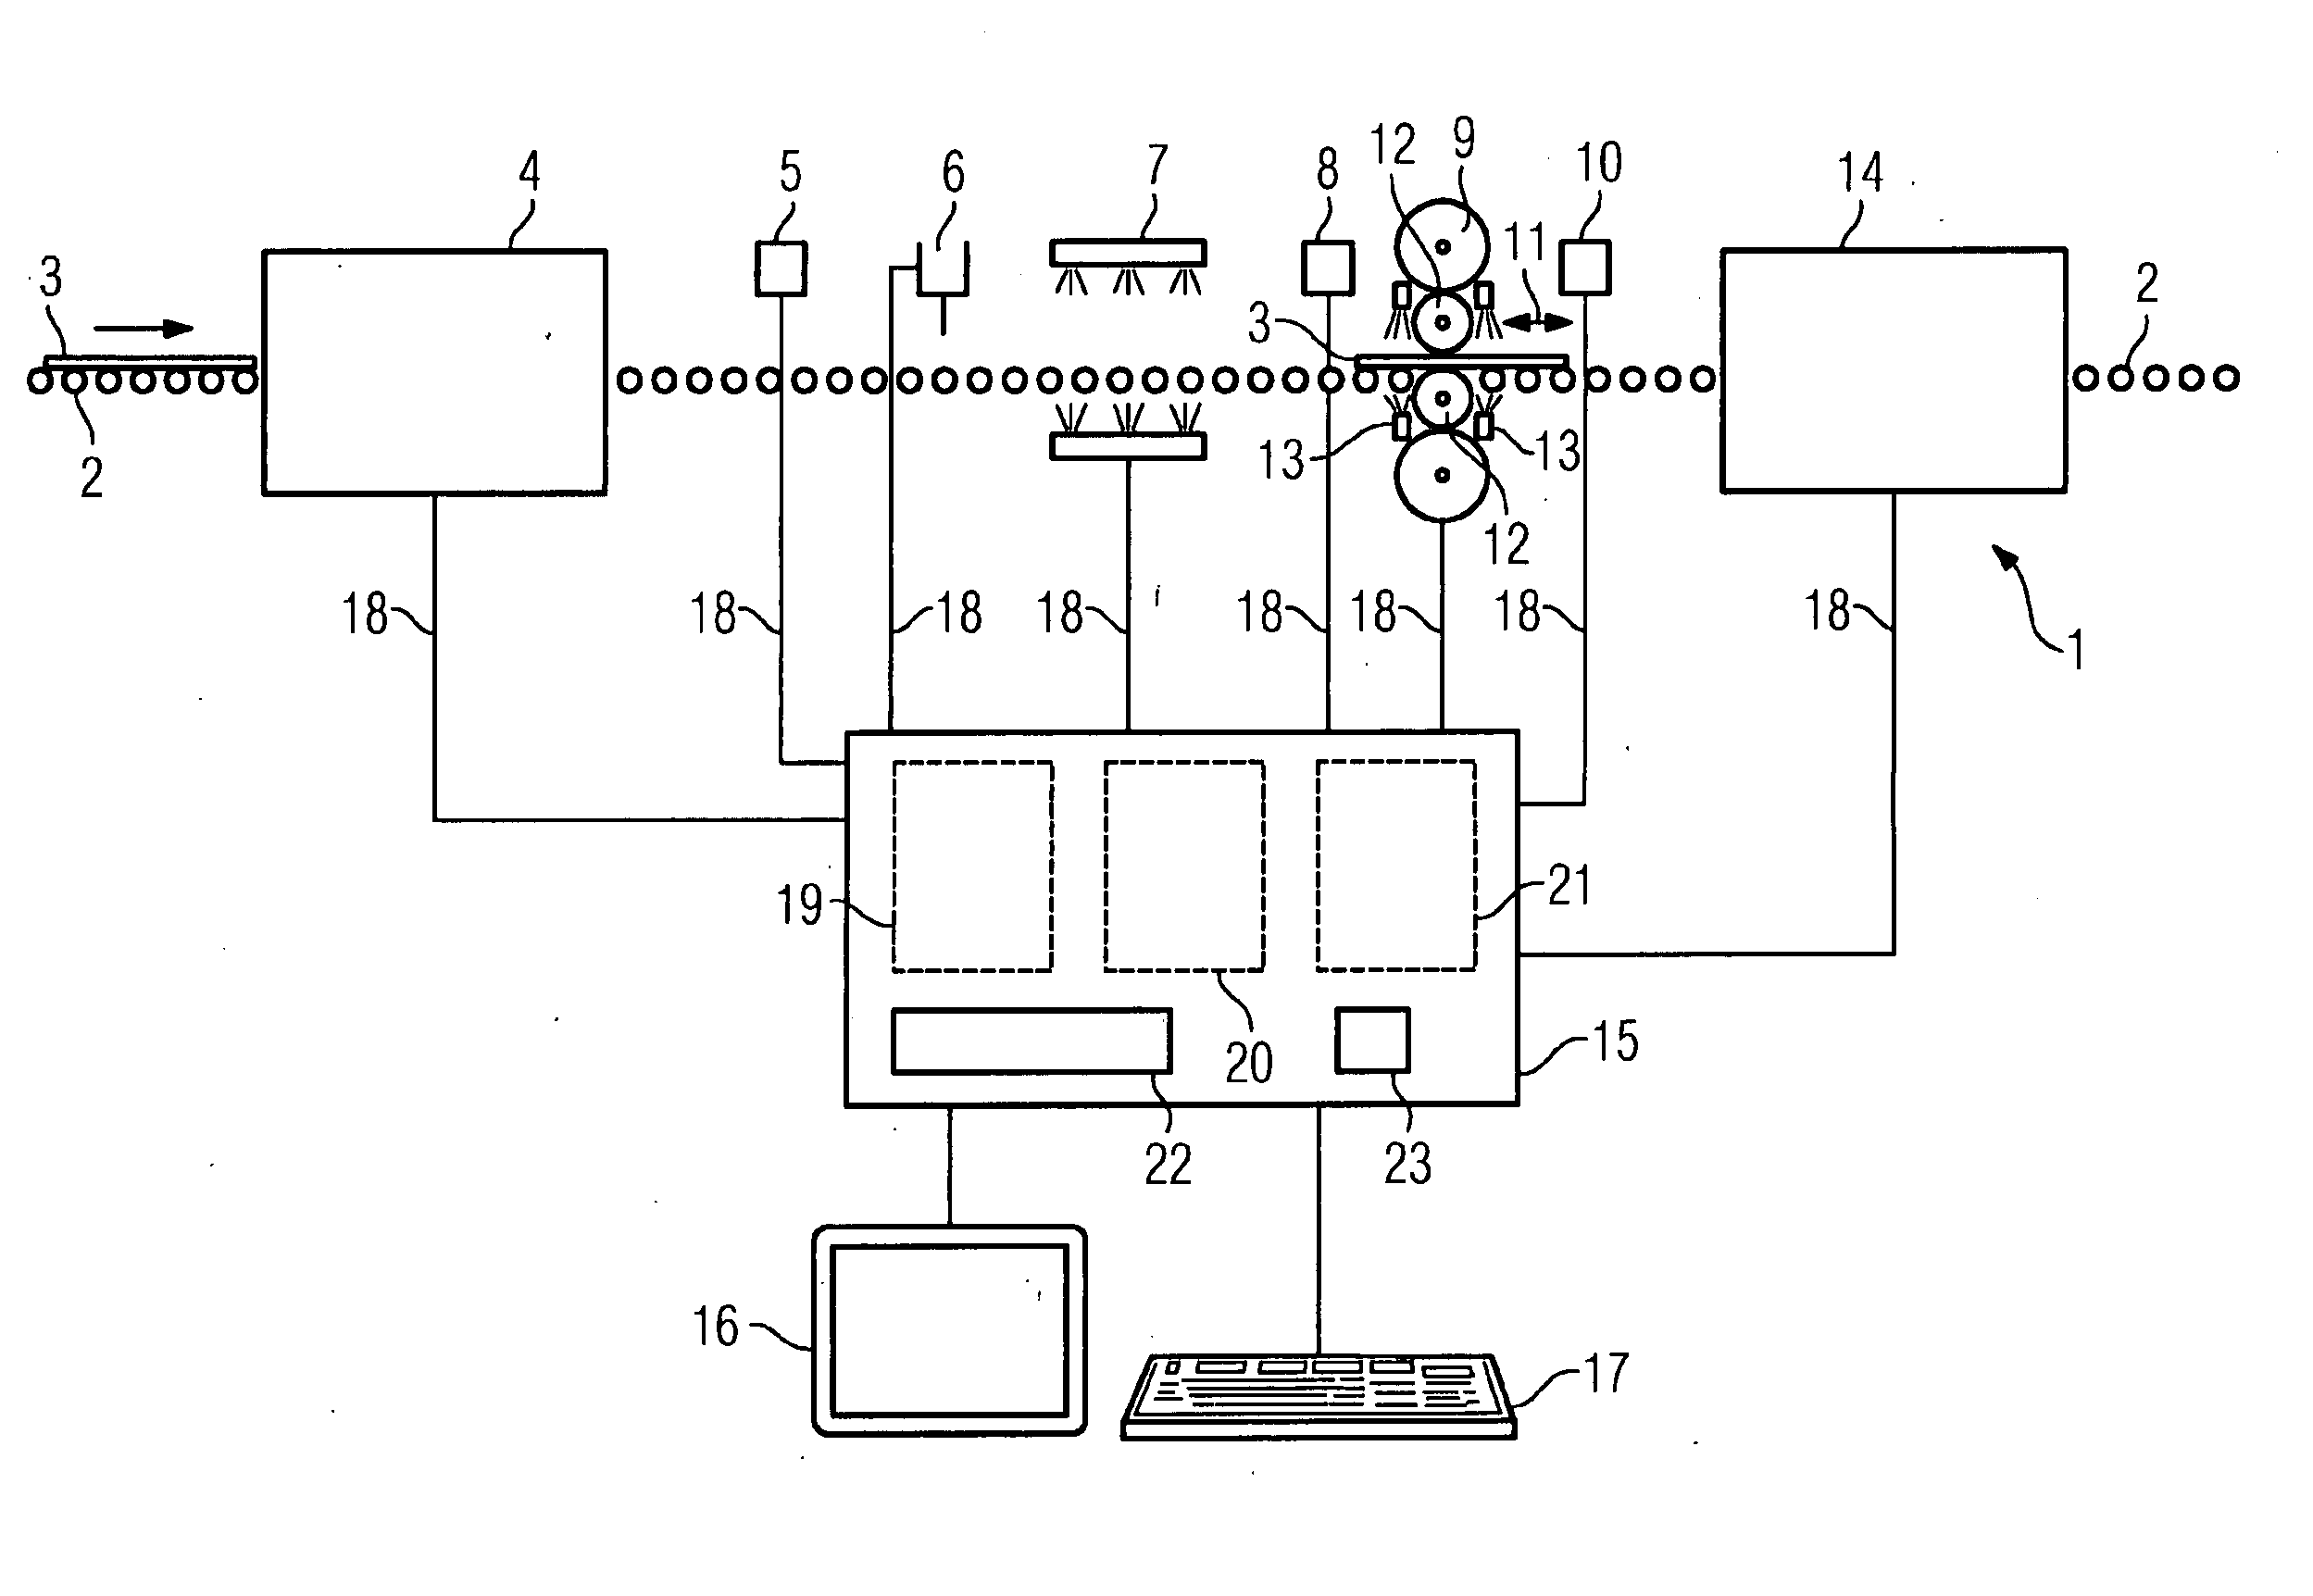 Method for monitoring the physical state of a hot-rolled sheet or hot-rolled strip while controlling a plate rolling train for working a hot-rolled sheet or hot-rolled strip